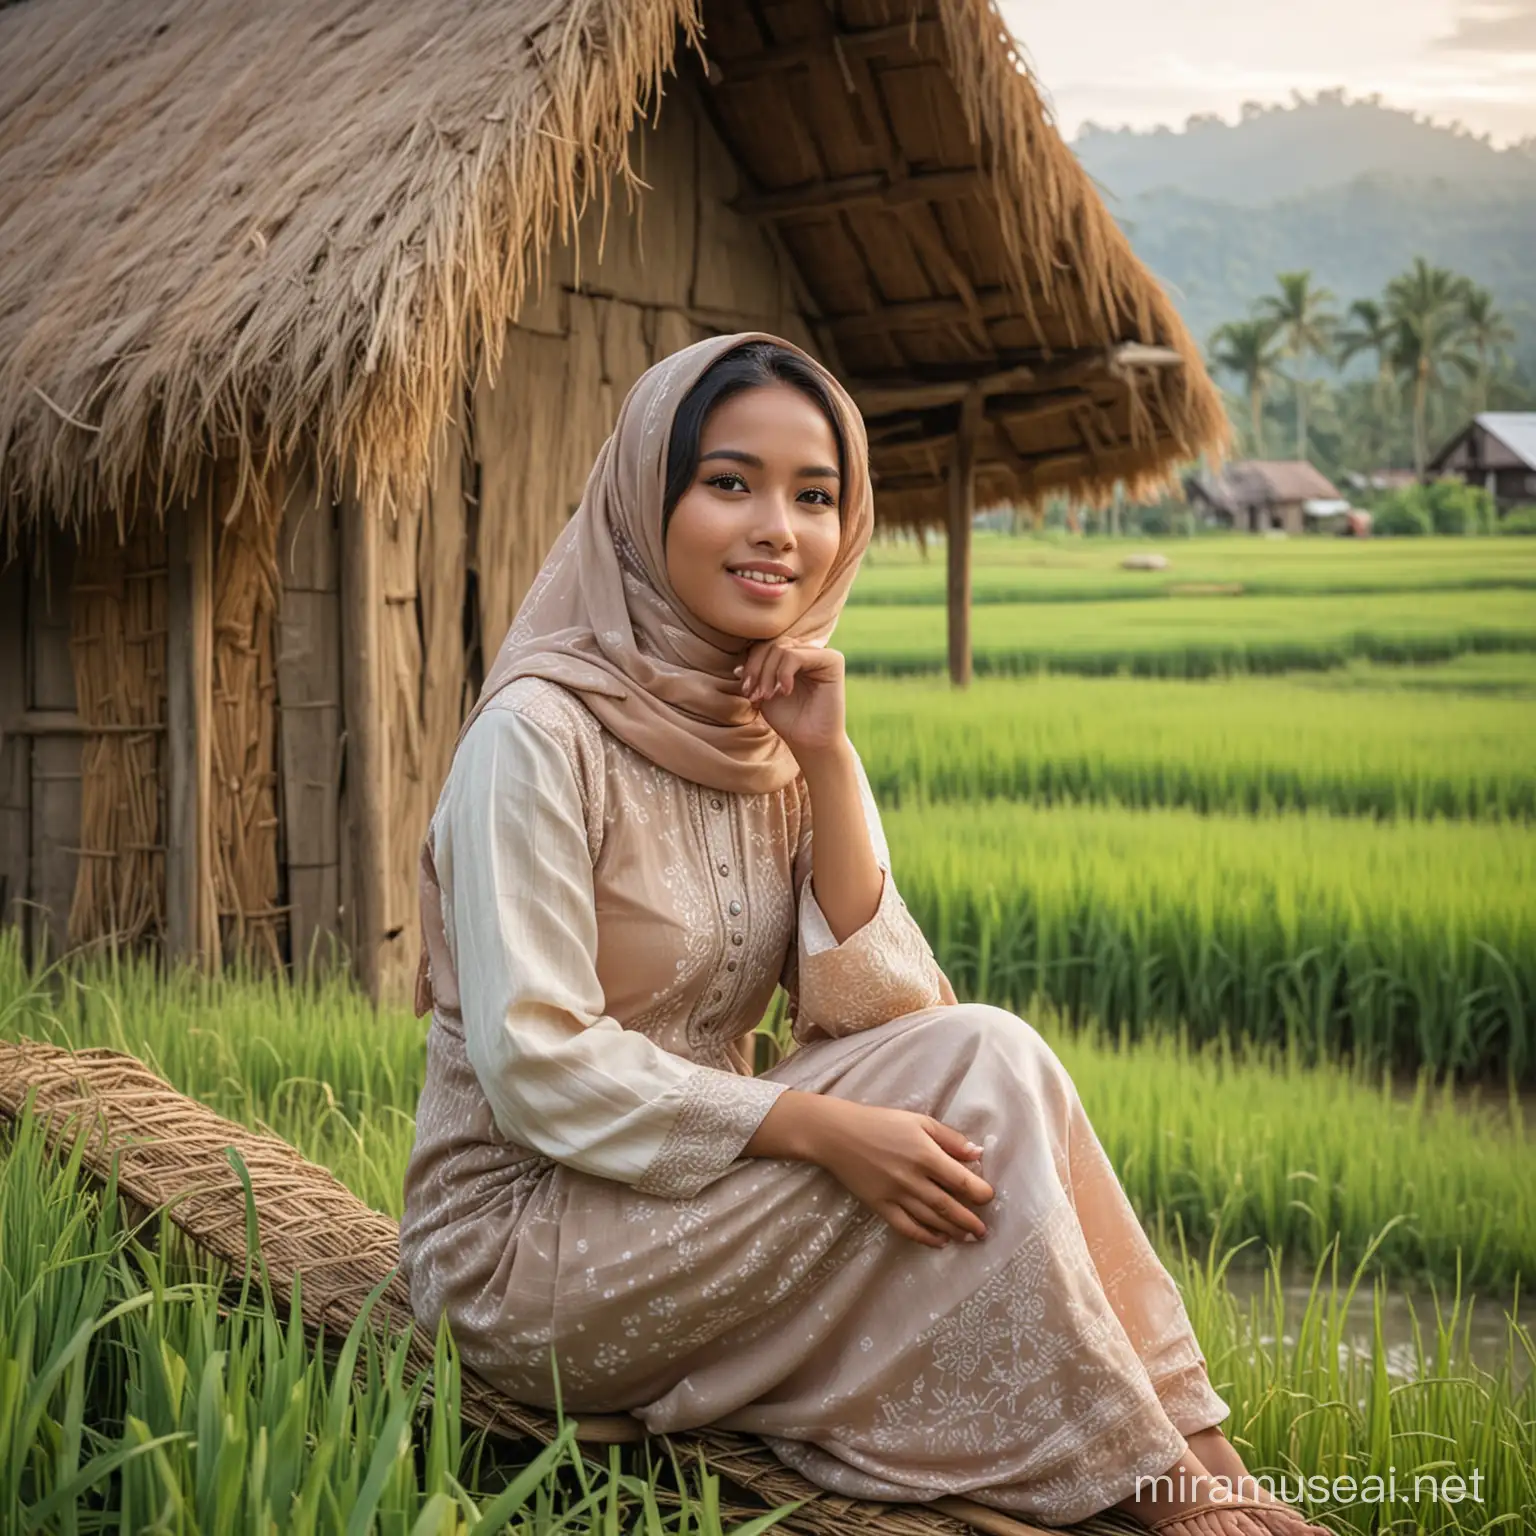 Indonesian Woman in Traditional Attire Daydreaming by Rice Fields